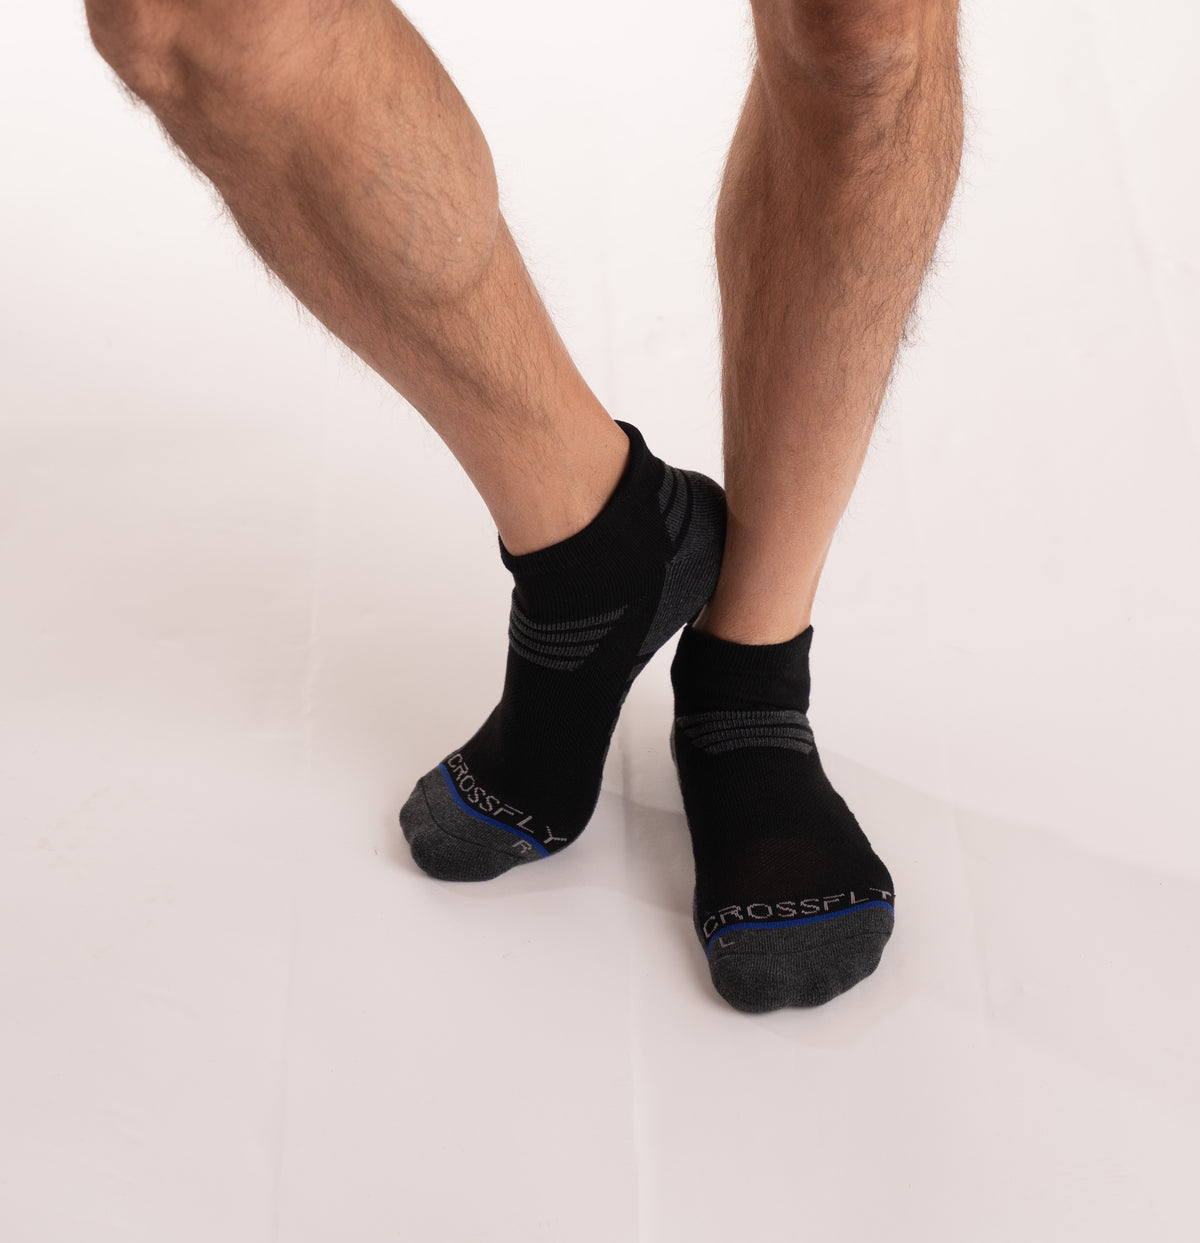 Crossfly men&#39;s Tempo Low Socks in black / charcoal from the Performance series, featuring AirBeams and 180 Hold.